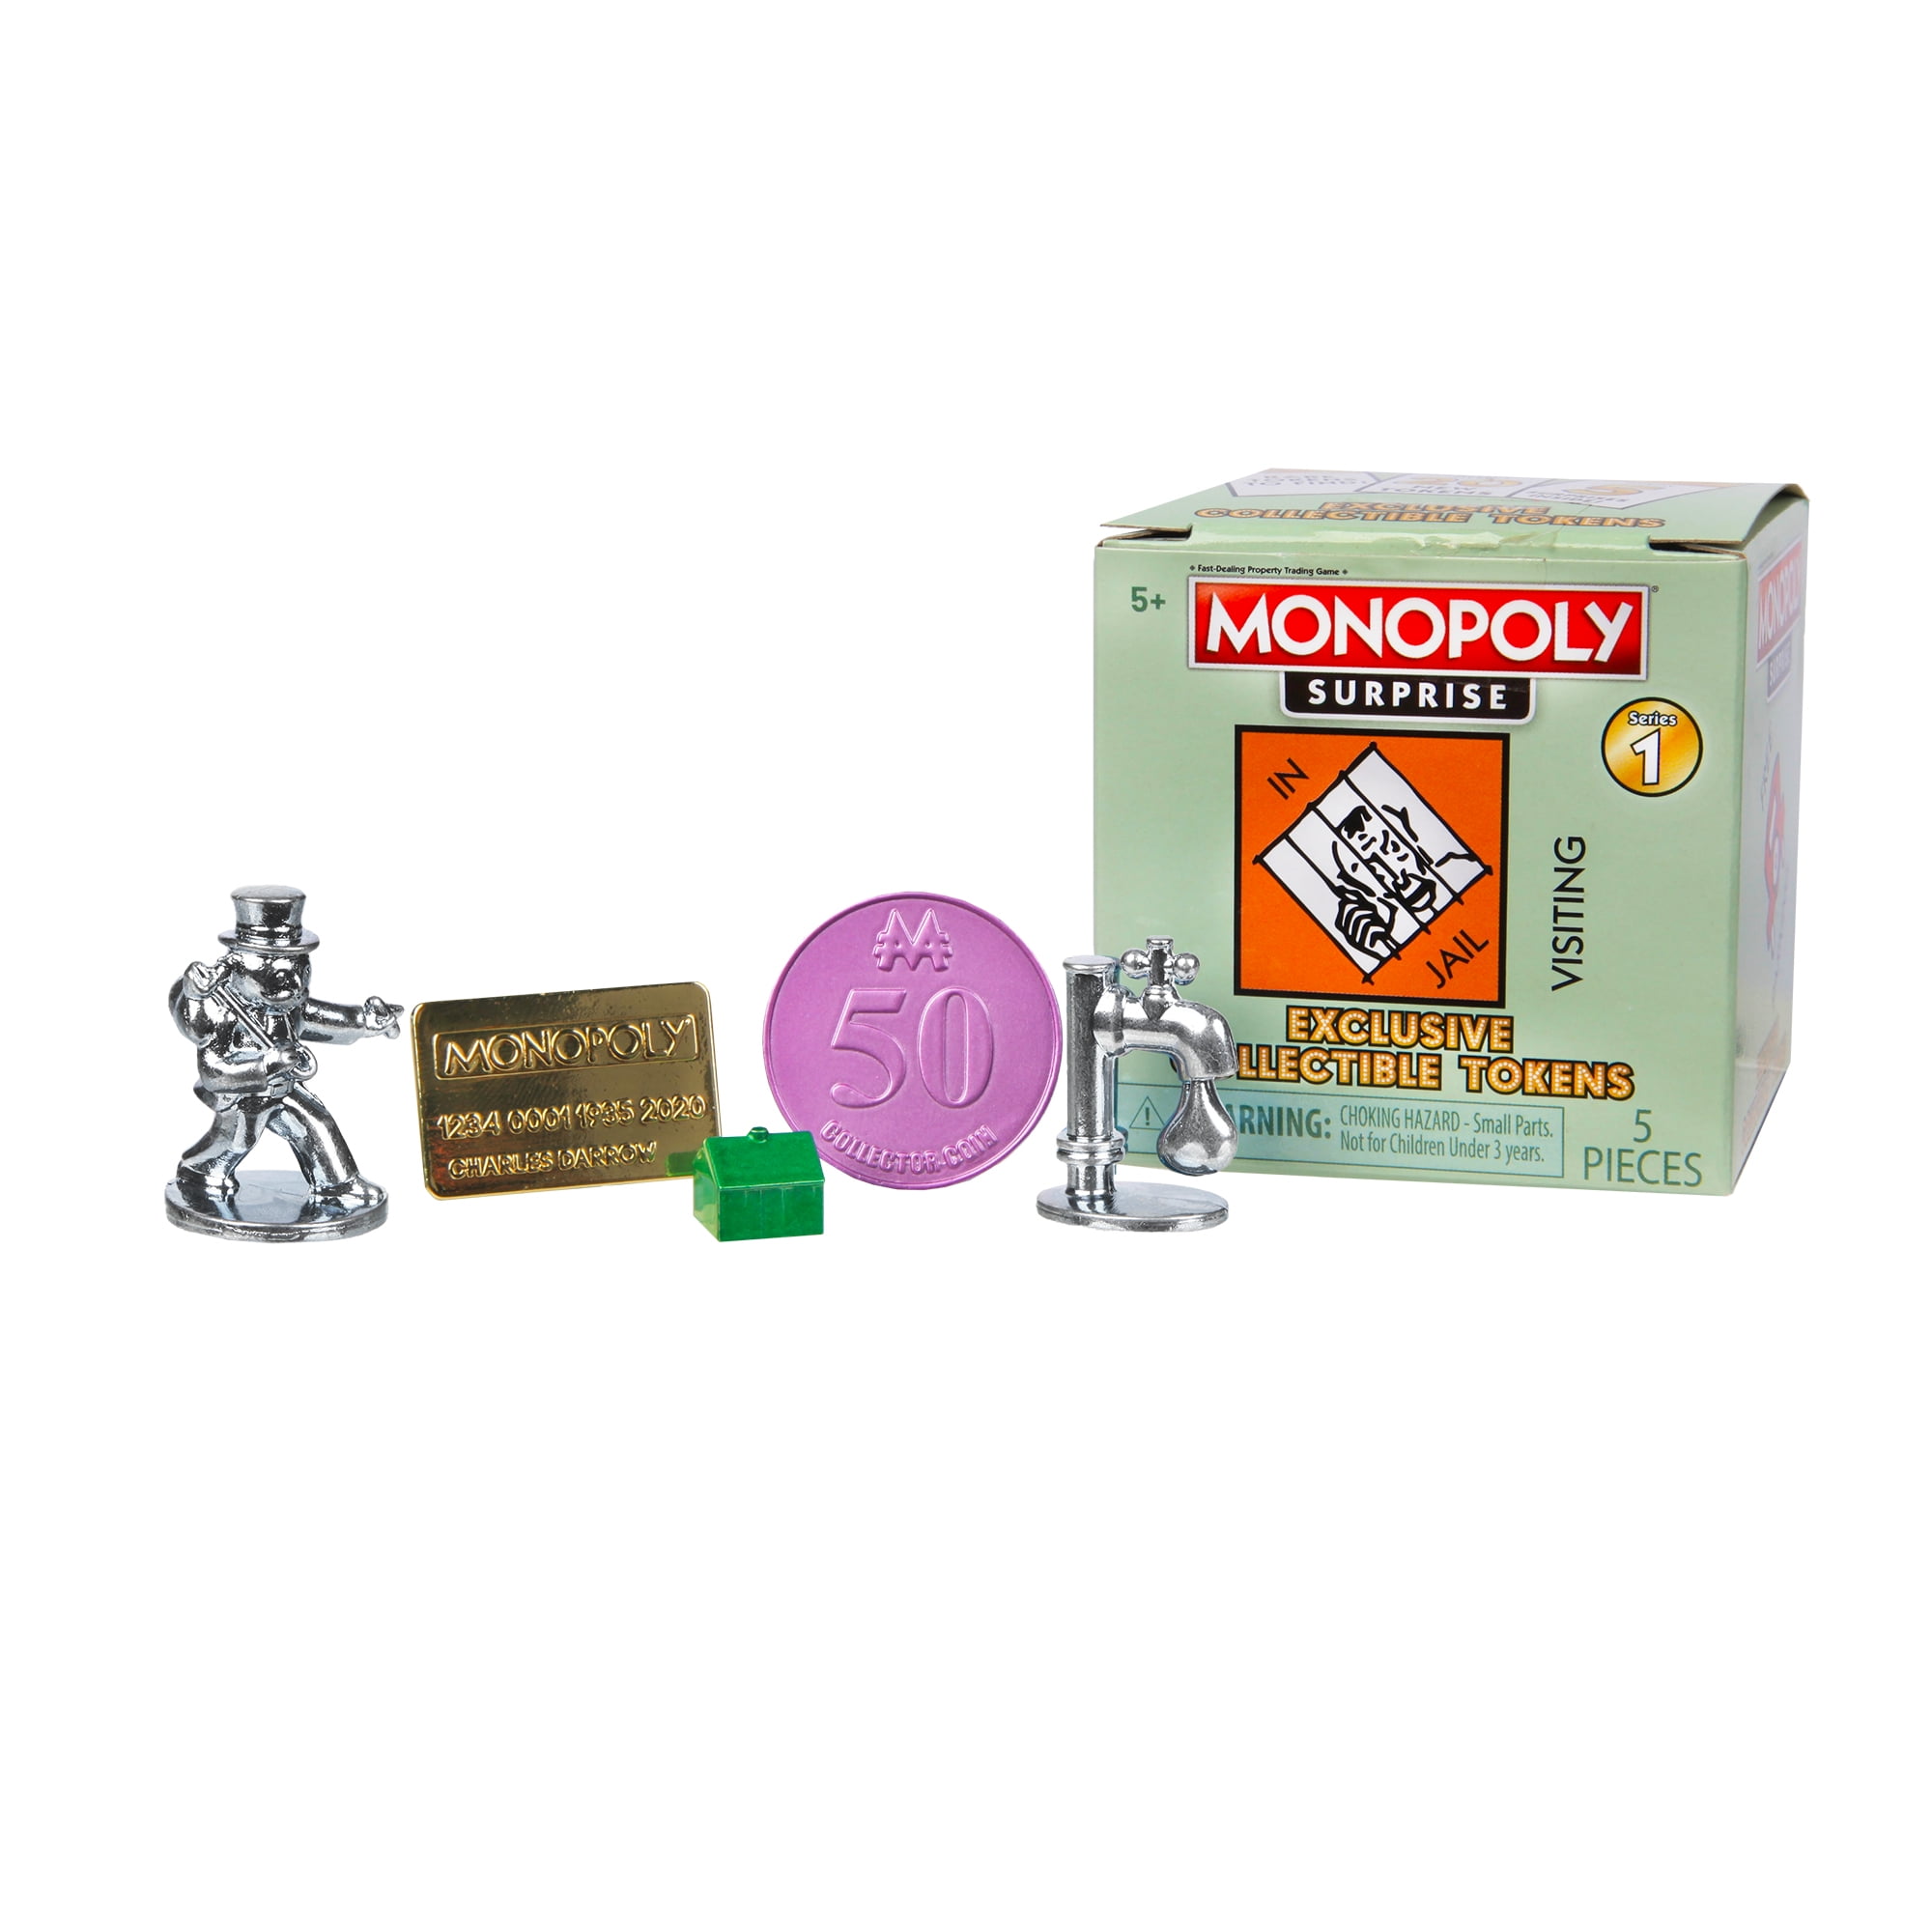 16 Boxes Monopoly Surprise 1st Series Exclusive Collectible Tokens BRAND NEW! 